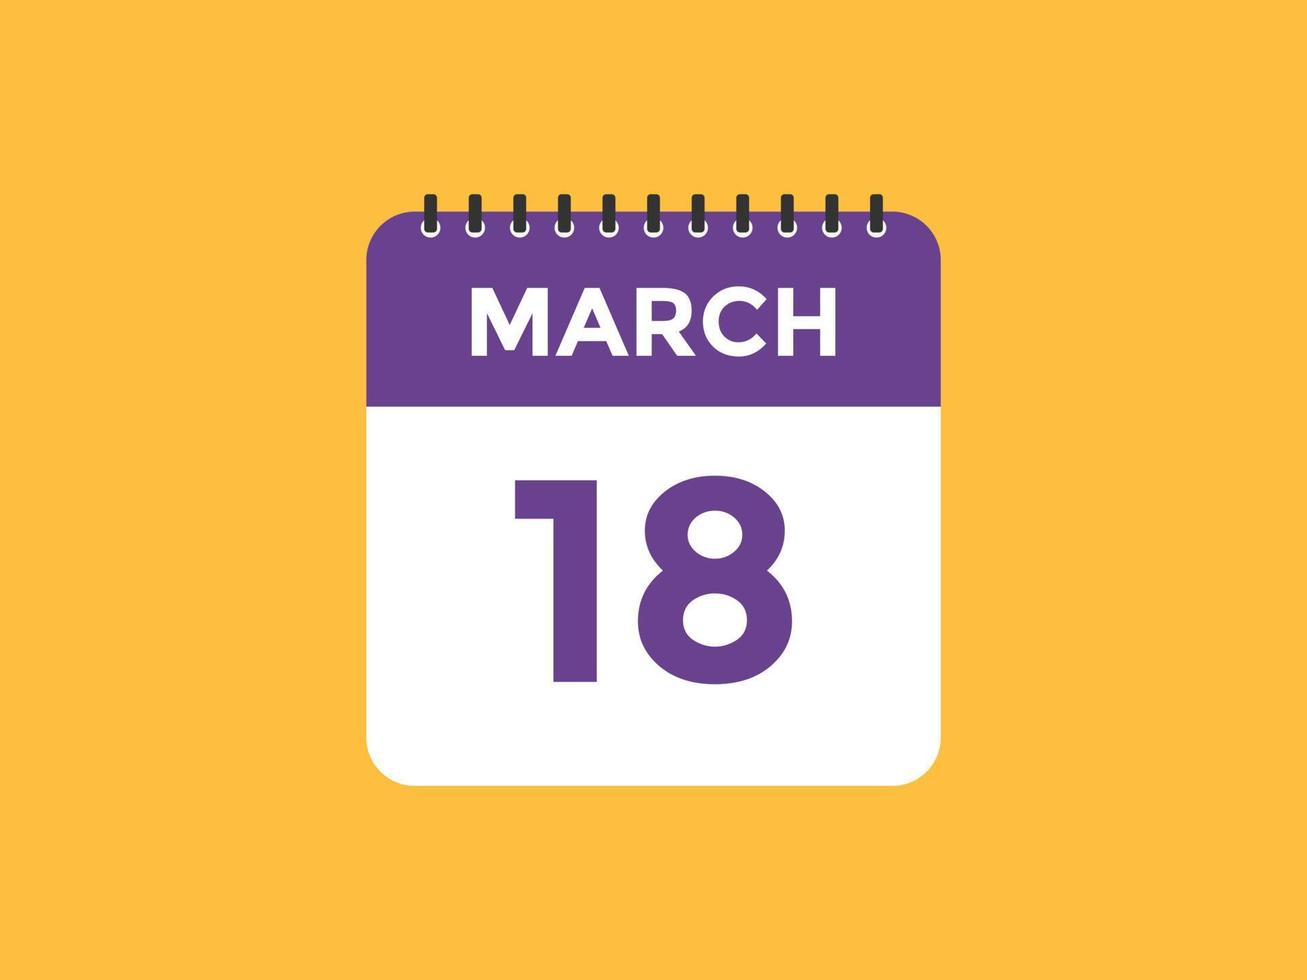 march 18 calendar reminder. 18th march daily calendar icon template. Calendar 18th march icon Design template. Vector illustration